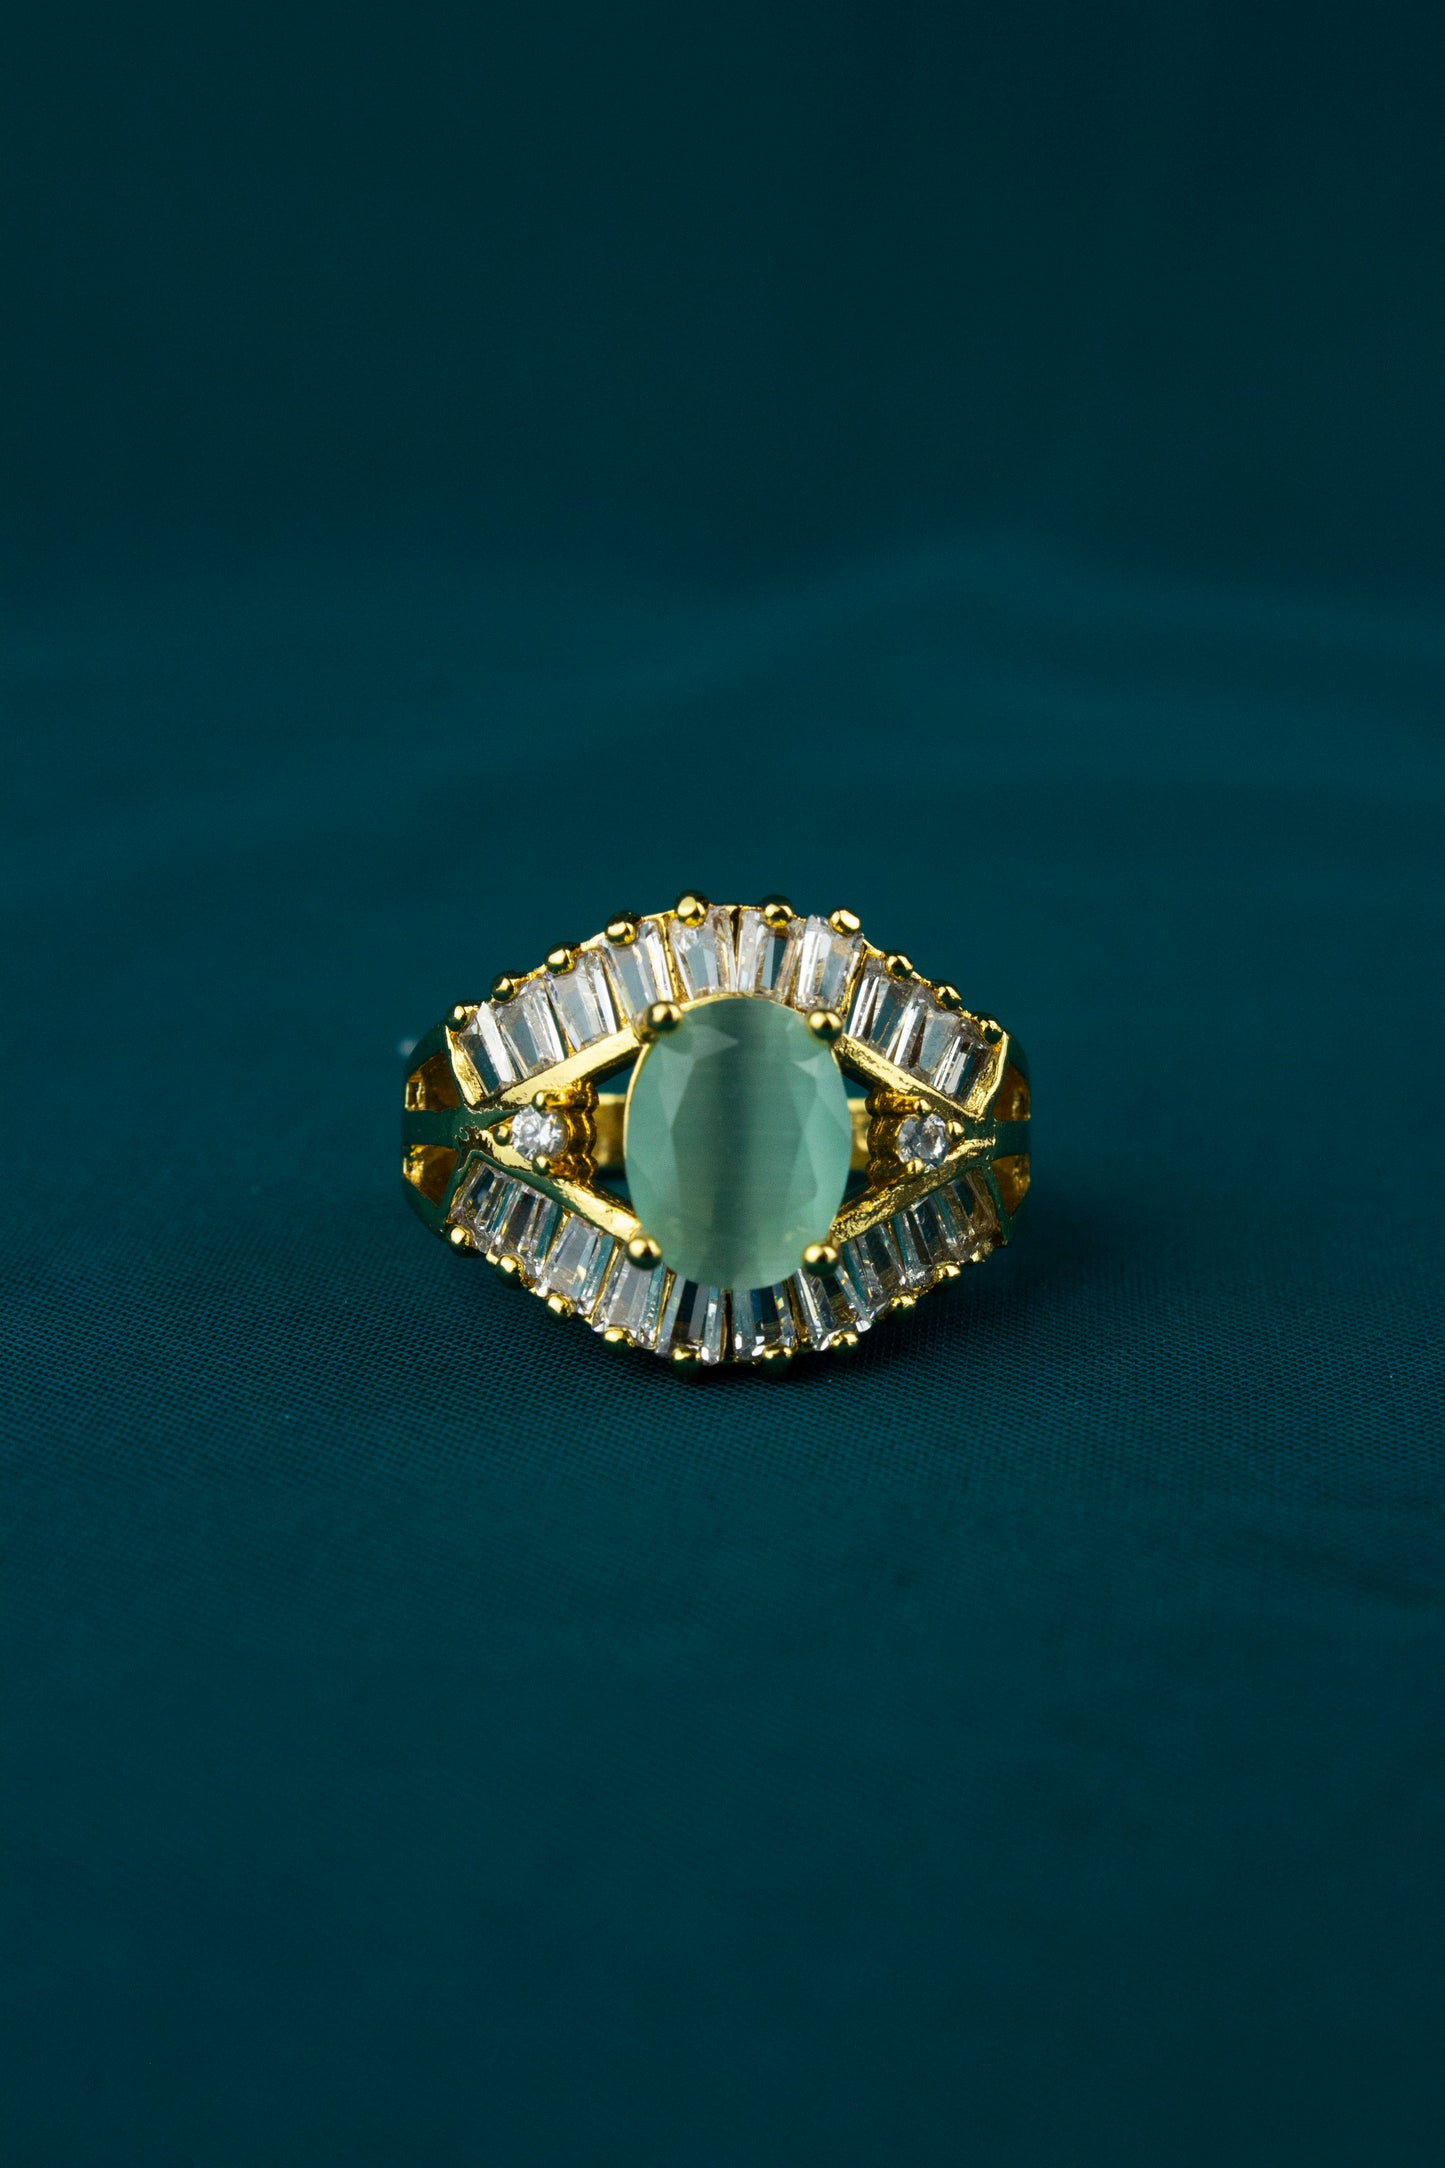 Special Edition Ring - Zinc Diamond - One Carat Gold Plated